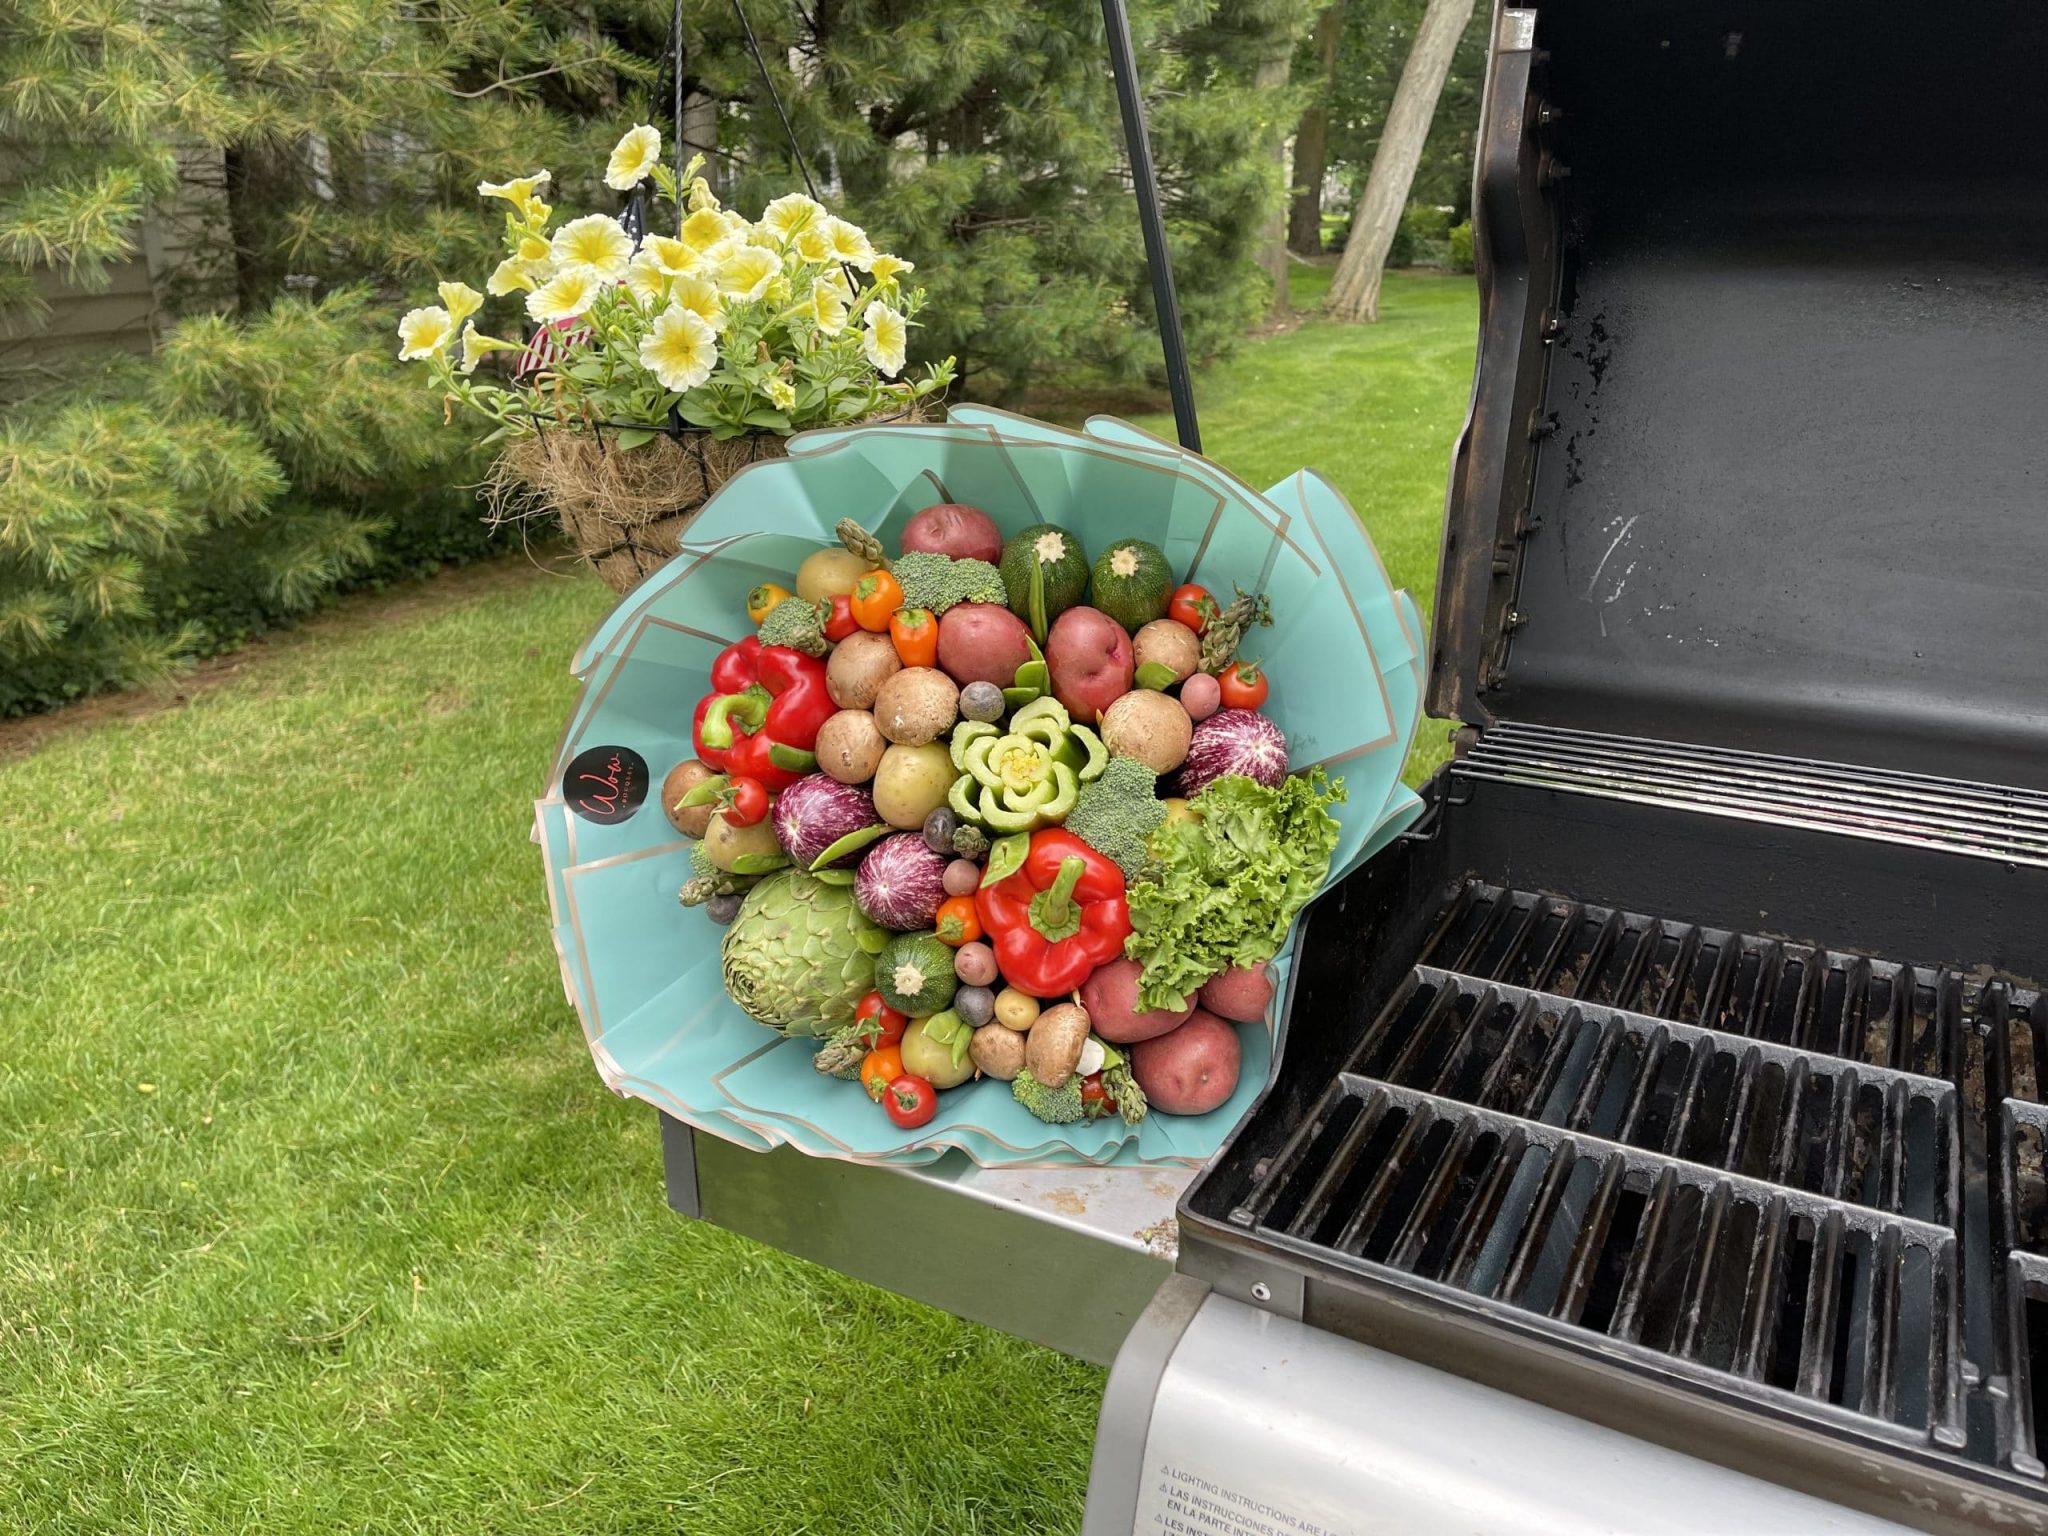 Vegetable bouquet by the grill